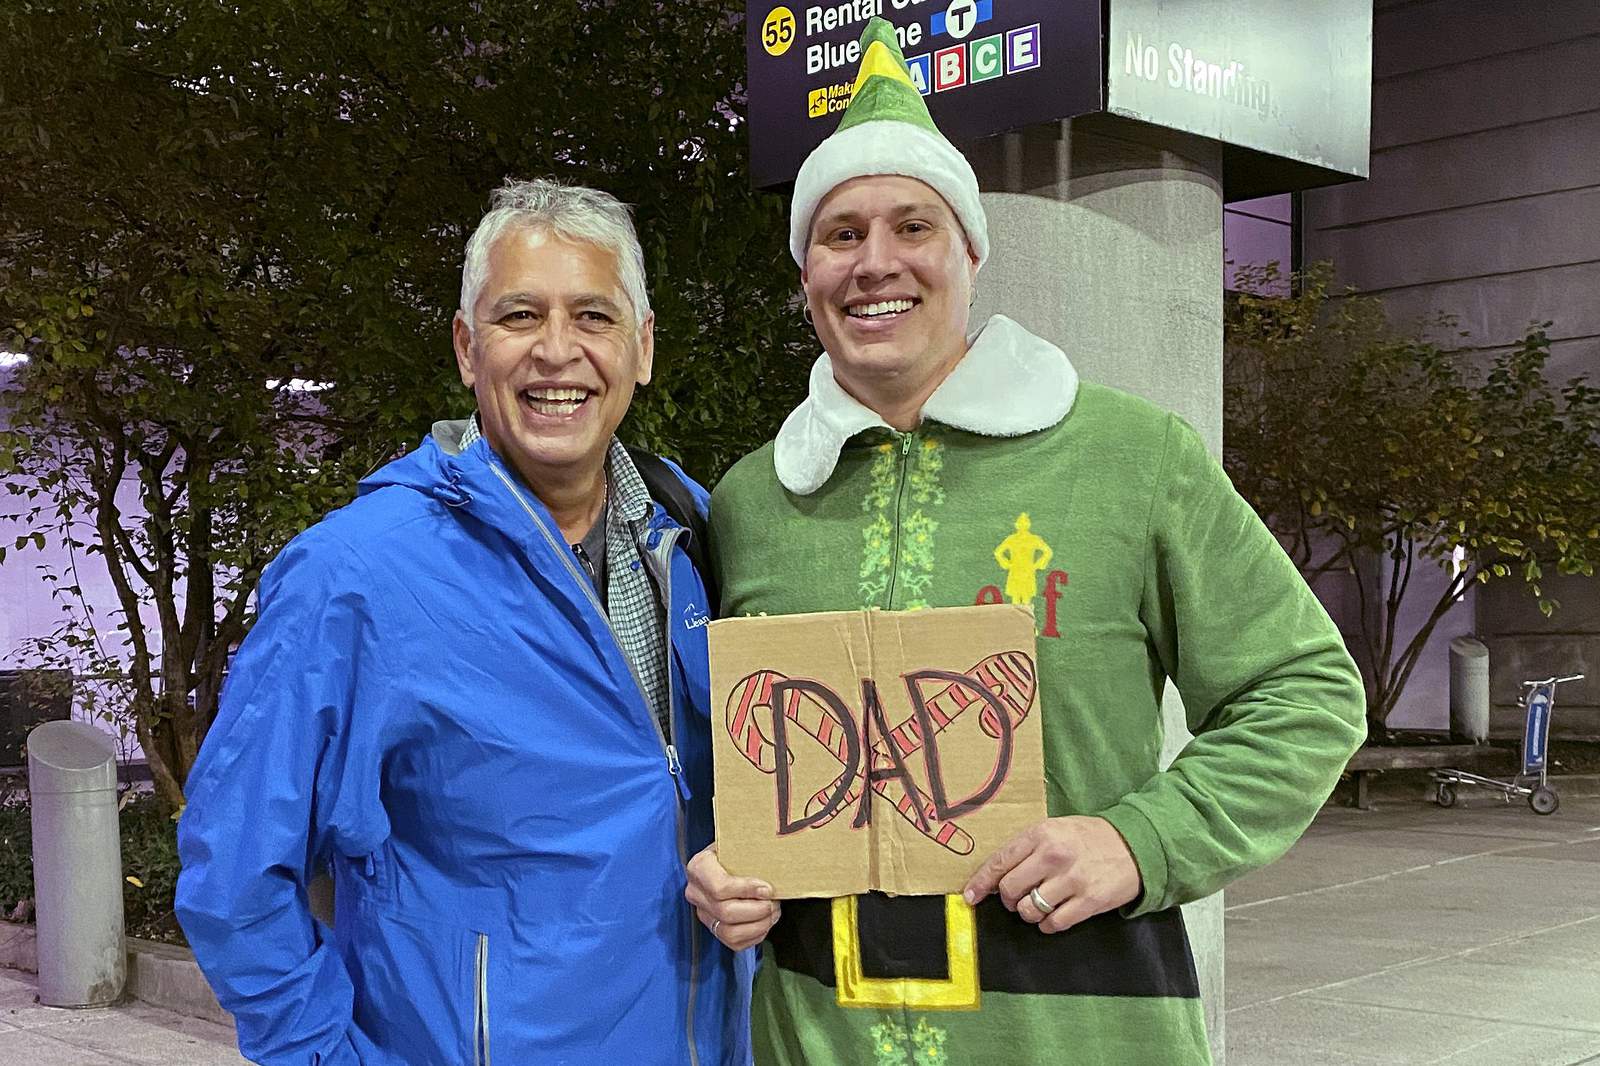 Scene from 'Elf' comes to life as Buddy meets dad in Boston